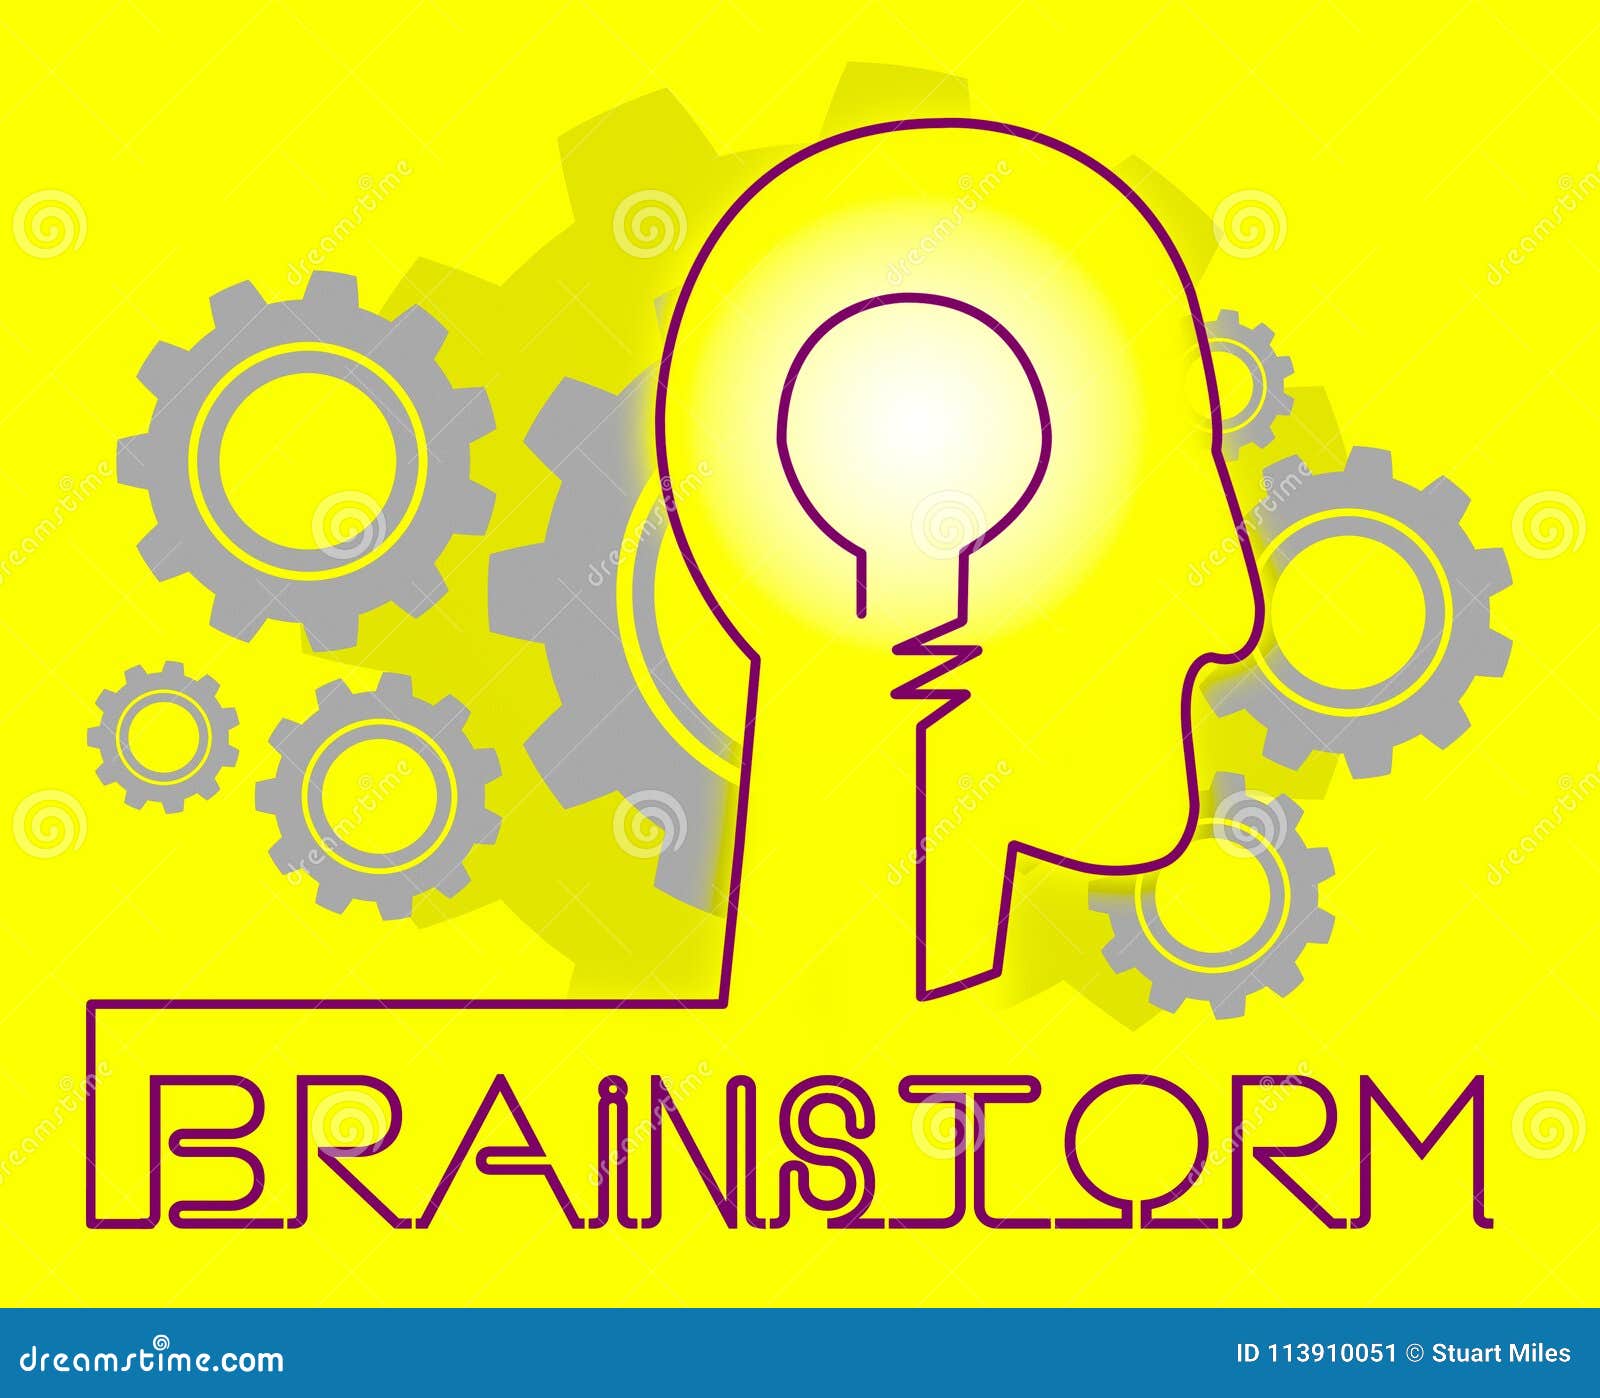 Brainstorm Cogs Means Dream Up and Brainstorming Stock Illustration ...